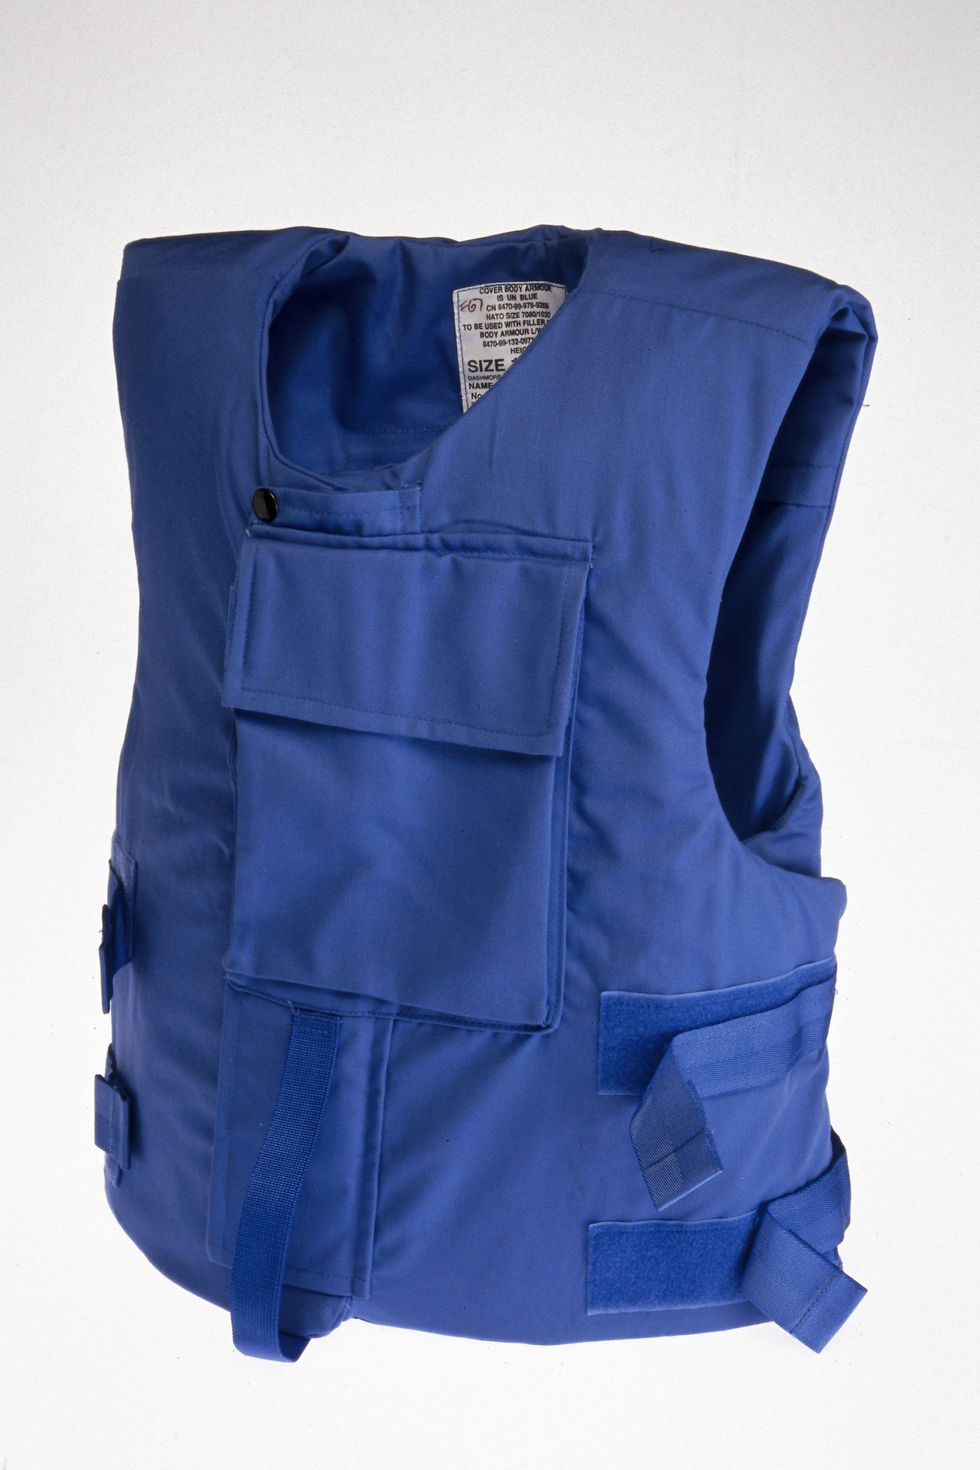 bullet and stab proof vest, c 1996